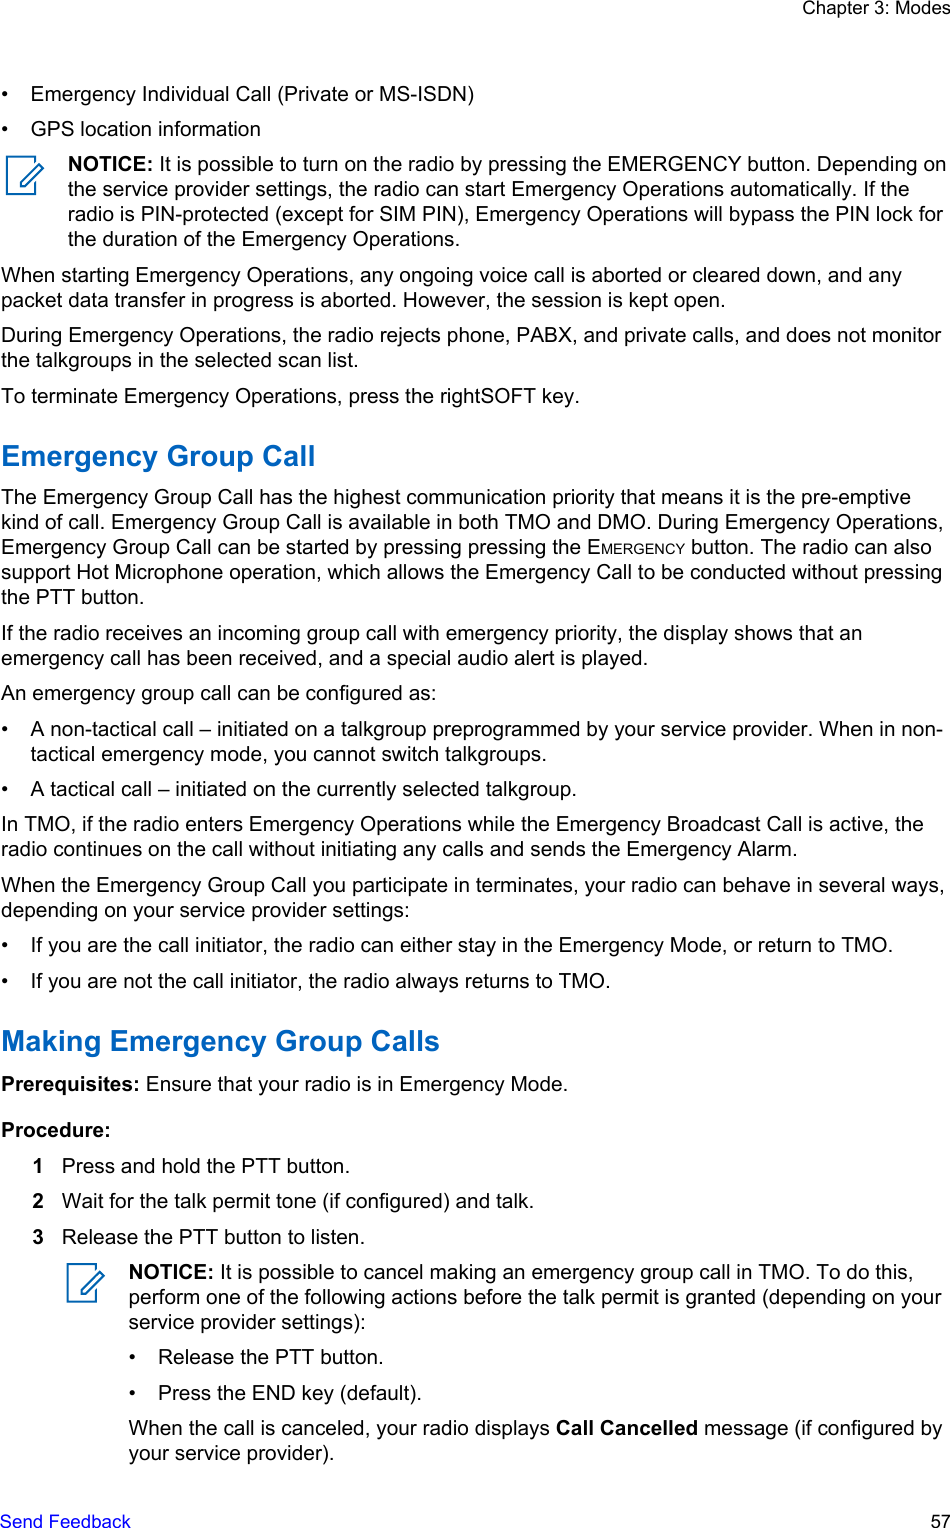 • Emergency Individual Call (Private or MS-ISDN)• GPS location informationNOTICE: It is possible to turn on the radio by pressing the EMERGENCY button. Depending onthe service provider settings, the radio can start Emergency Operations automatically. If theradio is PIN-protected (except for SIM PIN), Emergency Operations will bypass the PIN lock forthe duration of the Emergency Operations.When starting Emergency Operations, any ongoing voice call is aborted or cleared down, and anypacket data transfer in progress is aborted. However, the session is kept open.During Emergency Operations, the radio rejects phone, PABX, and private calls, and does not monitorthe talkgroups in the selected scan list.To terminate Emergency Operations, press the rightSOFT key.Emergency Group CallThe Emergency Group Call has the highest communication priority that means it is the pre-emptivekind of call. Emergency Group Call is available in both TMO and DMO. During Emergency Operations,Emergency Group Call can be started by pressing pressing the EMERGENCY button. The radio can alsosupport Hot Microphone operation, which allows the Emergency Call to be conducted without pressingthe PTT button.If the radio receives an incoming group call with emergency priority, the display shows that anemergency call has been received, and a special audio alert is played.An emergency group call can be configured as:• A non-tactical call – initiated on a talkgroup preprogrammed by your service provider. When in non-tactical emergency mode, you cannot switch talkgroups.• A tactical call – initiated on the currently selected talkgroup.In TMO, if the radio enters Emergency Operations while the Emergency Broadcast Call is active, theradio continues on the call without initiating any calls and sends the Emergency Alarm.When the Emergency Group Call you participate in terminates, your radio can behave in several ways,depending on your service provider settings:• If you are the call initiator, the radio can either stay in the Emergency Mode, or return to TMO.• If you are not the call initiator, the radio always returns to TMO.Making Emergency Group CallsPrerequisites: Ensure that your radio is in Emergency Mode.Procedure:1Press and hold the PTT button.2Wait for the talk permit tone (if configured) and talk.3Release the PTT button to listen.NOTICE: It is possible to cancel making an emergency group call in TMO. To do this,perform one of the following actions before the talk permit is granted (depending on yourservice provider settings):• Release the PTT button.• Press the END key (default).When the call is canceled, your radio displays Call Cancelled message (if configured byyour service provider).Chapter 3: ModesSend Feedback   57